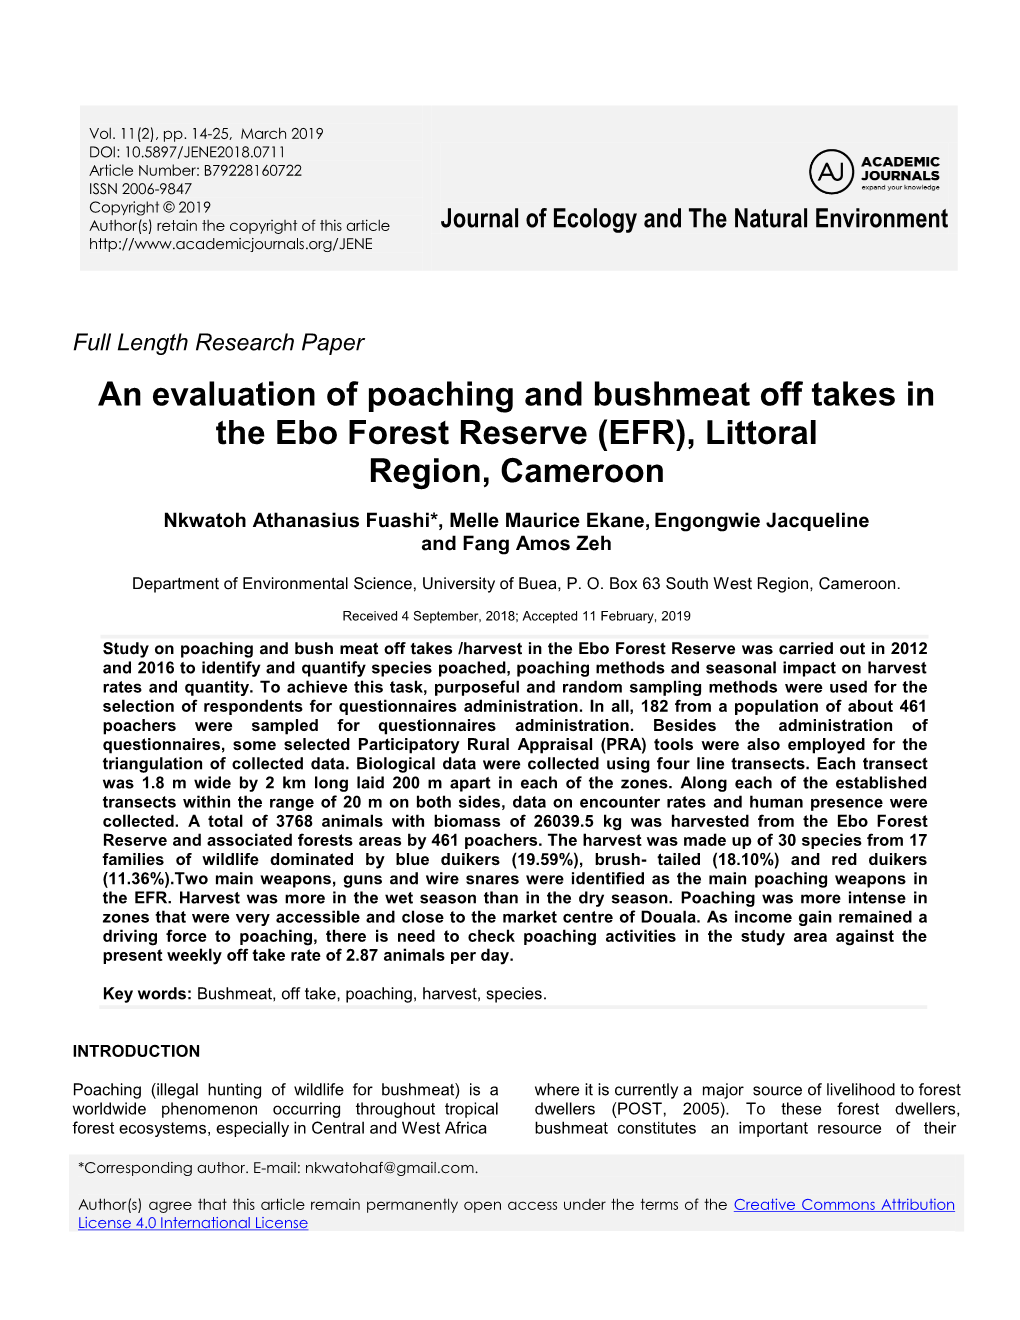 An Evaluation of Poaching and Bushmeat Off Takes in the Ebo Forest Reserve (EFR), Littoral Region, Cameroon